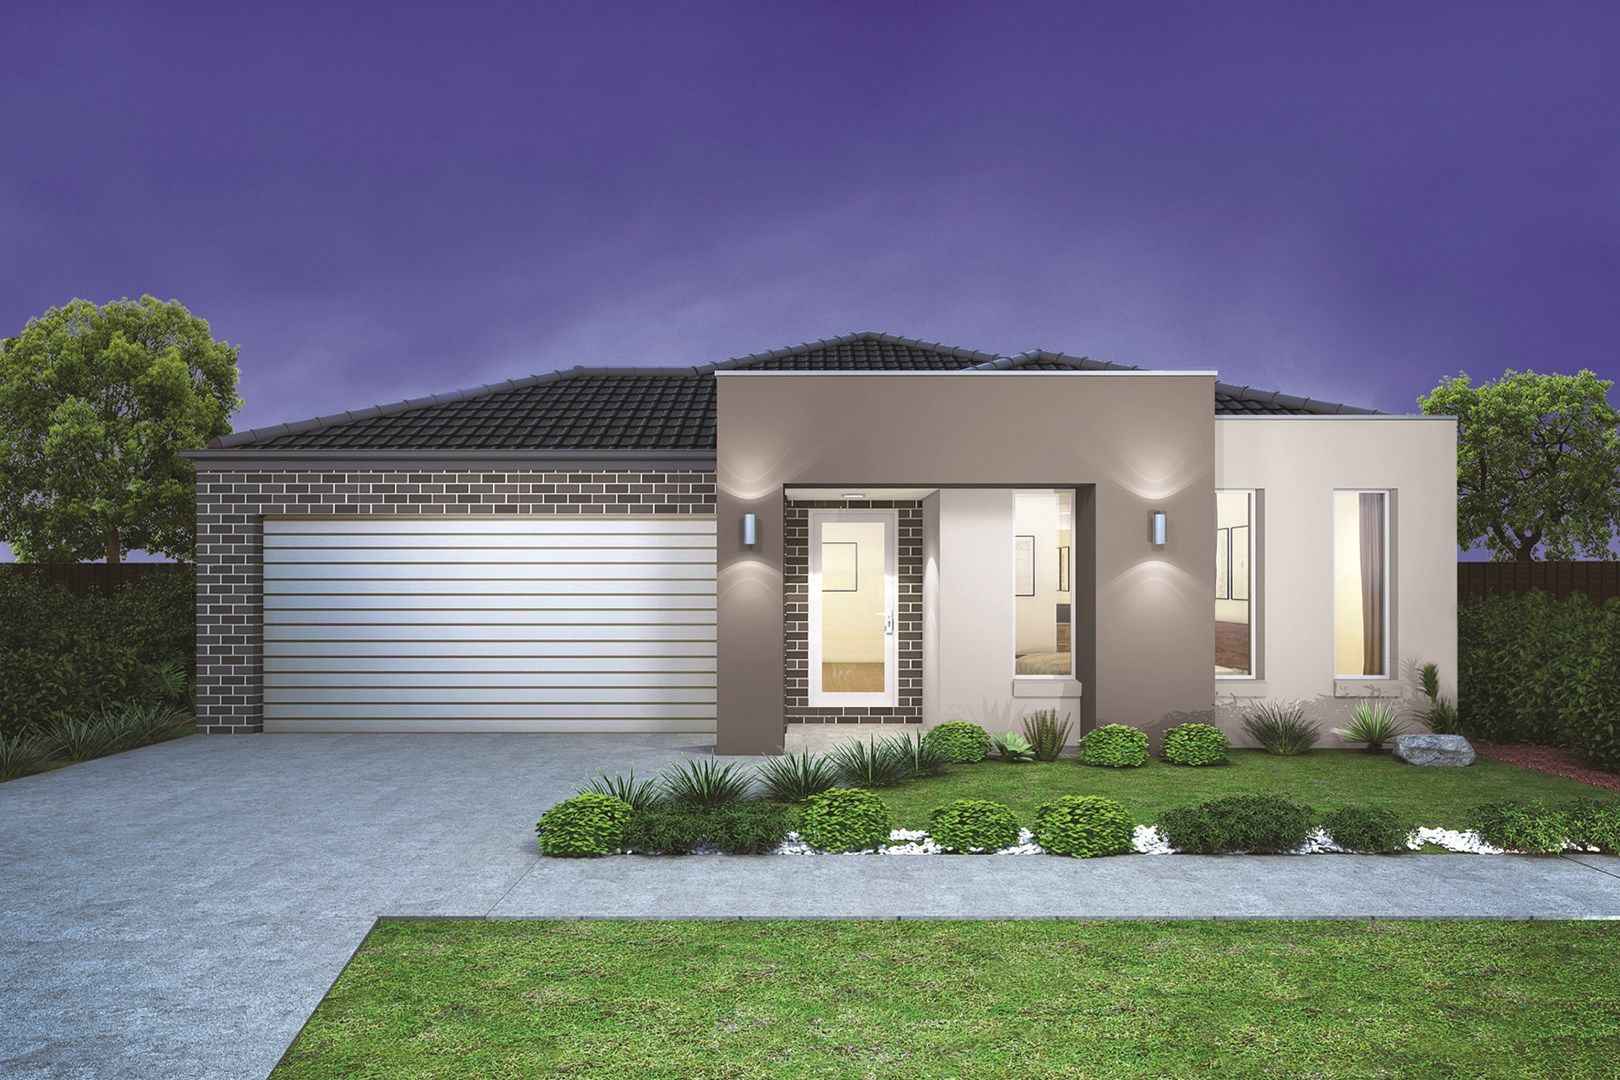 4 bedrooms New House & Land in LOT 560 Taylors Run FRASER RISE VIC, 3336